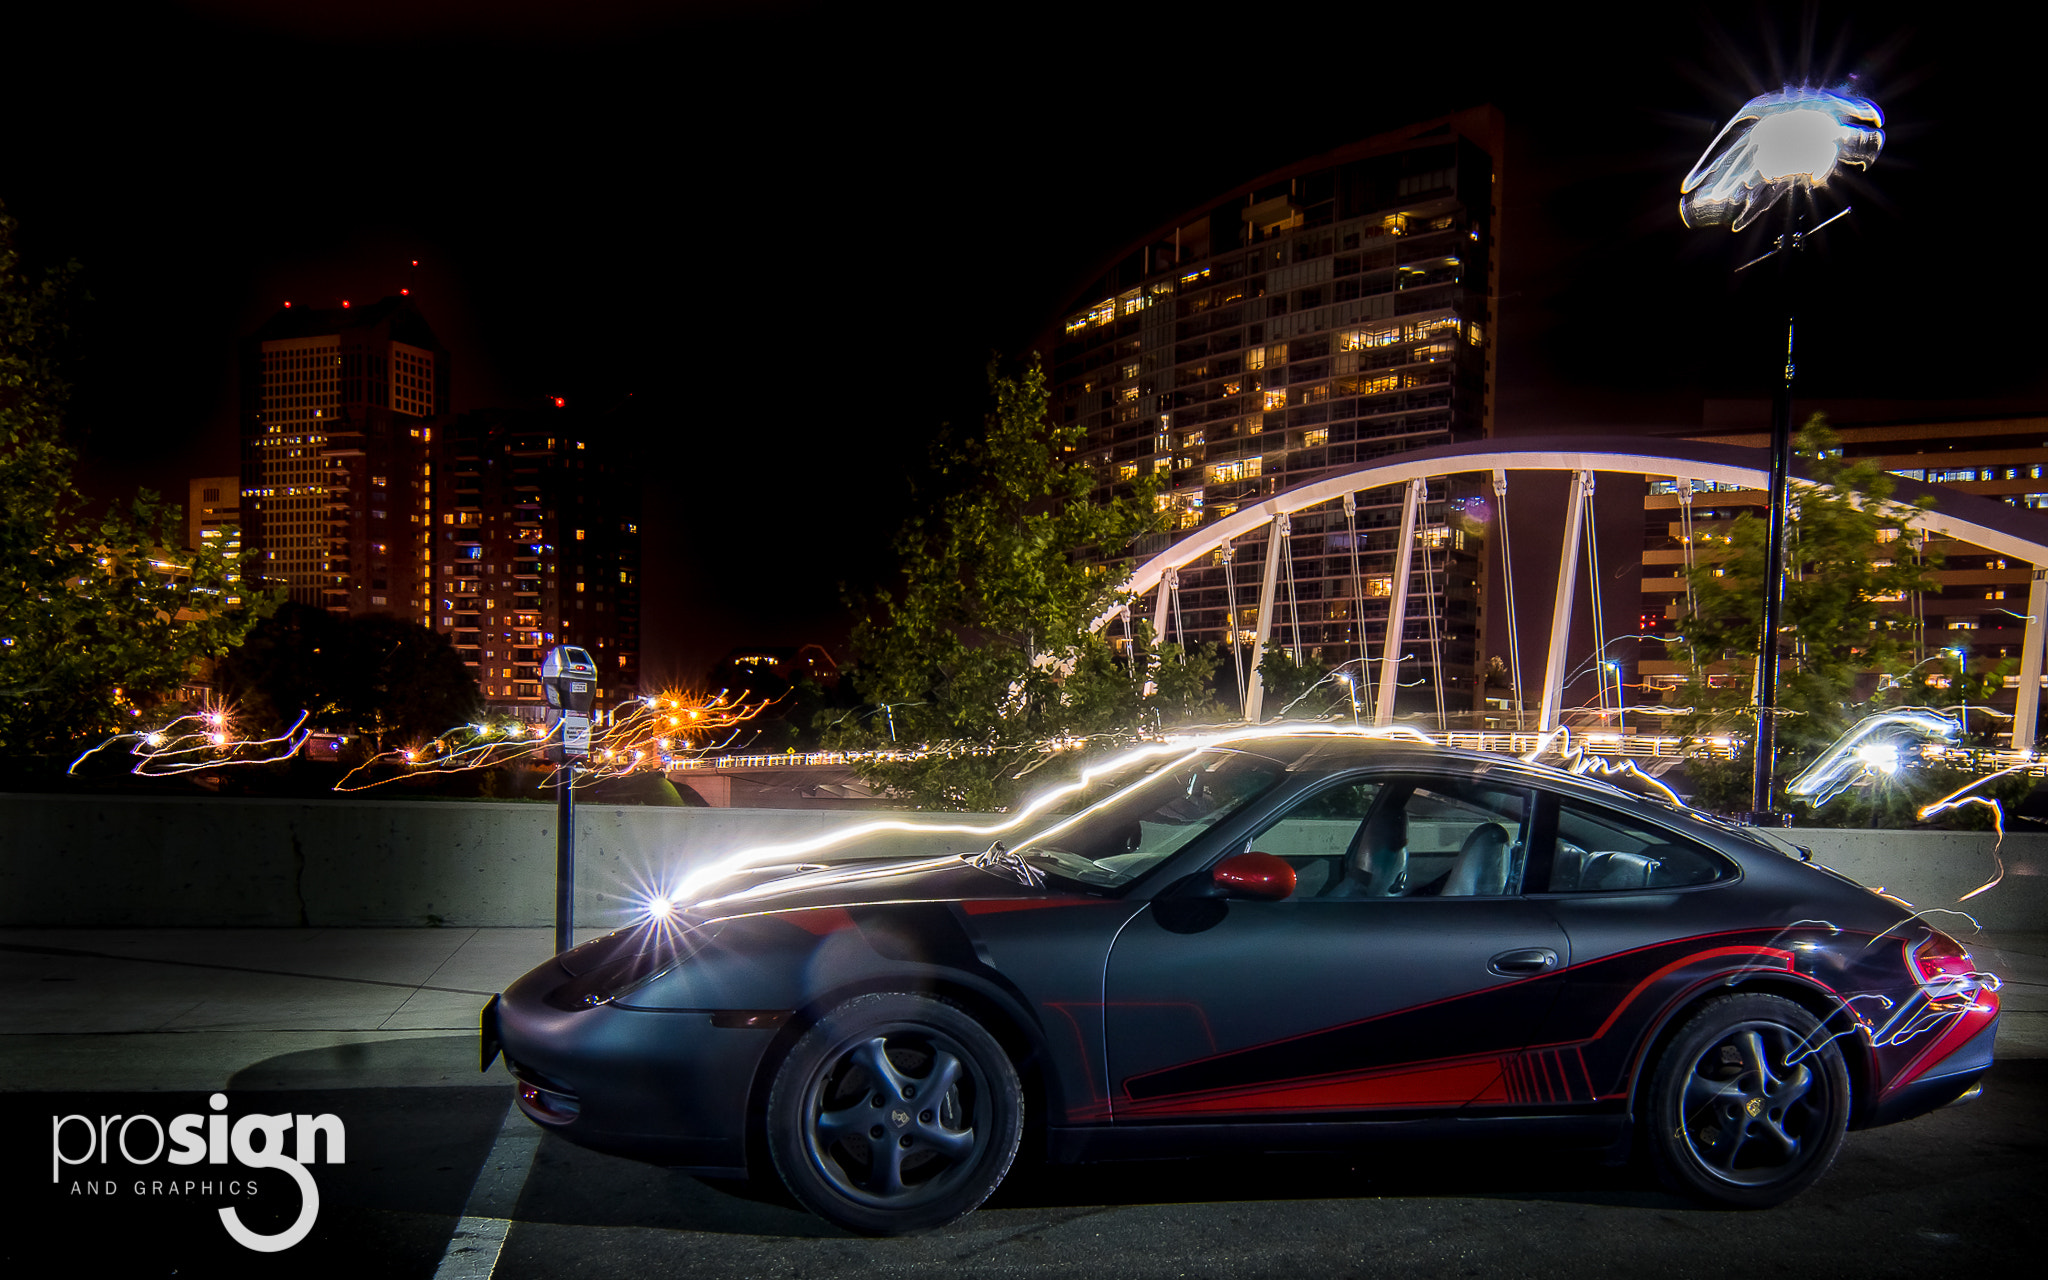 Sony ILCA-77M2 + 20mm F2.8 sample photo. Porsche 911 custom wrapped with hand-laid graphics in long exposure - columbus, ohio usa photography